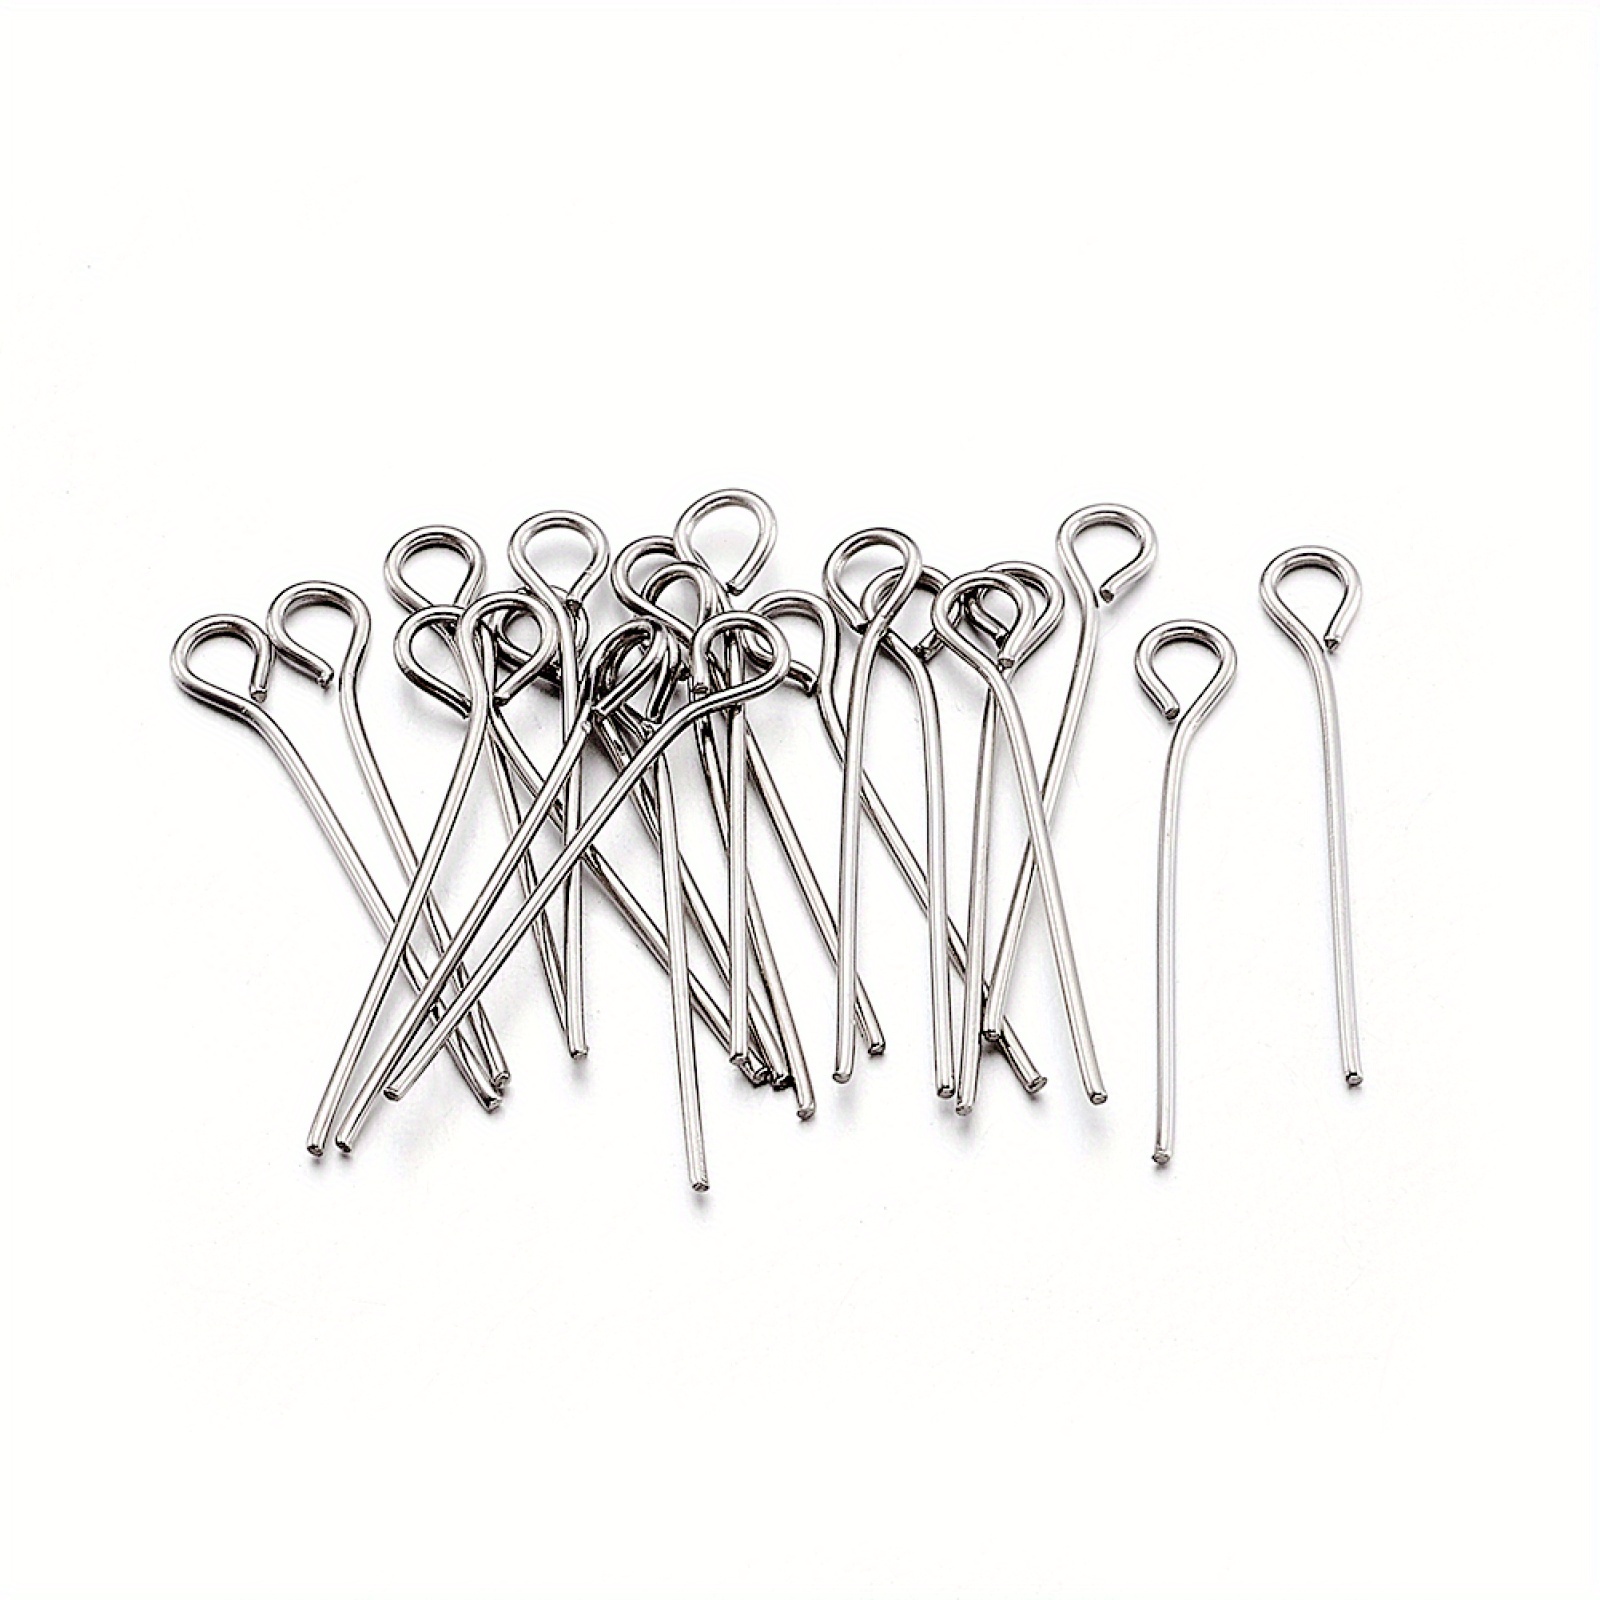 50pcs/lot 15/20/25/30/35/40 mm Metal Steel Double Eye Pin Earrings Ear  Connecting Rod For DIY Jewelry Pins Making Handcraft Supplies